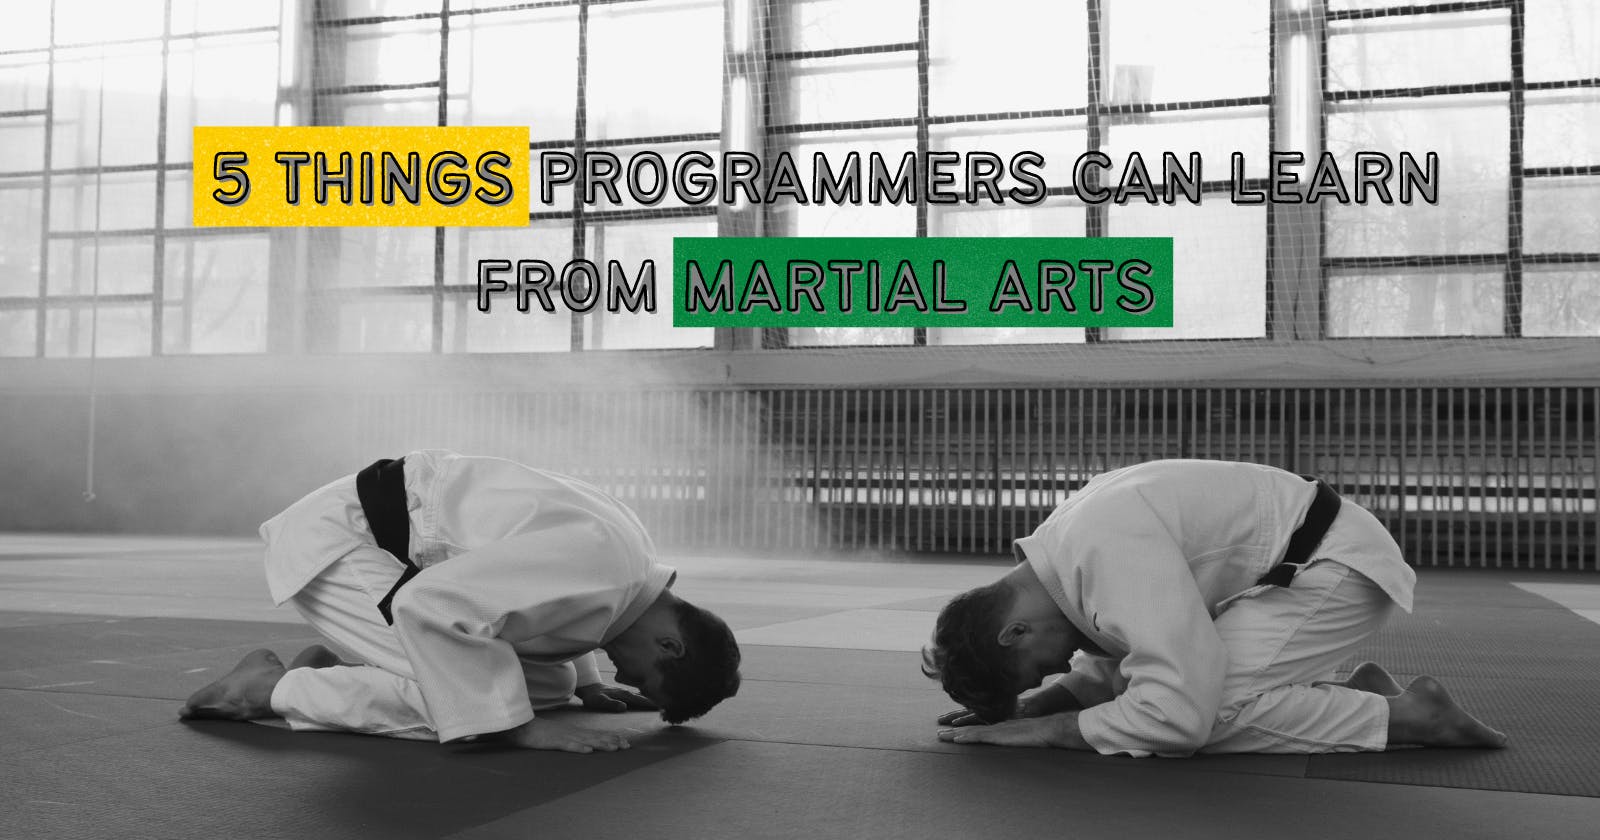 5 lessons from martial arts for we can use when learning programming.